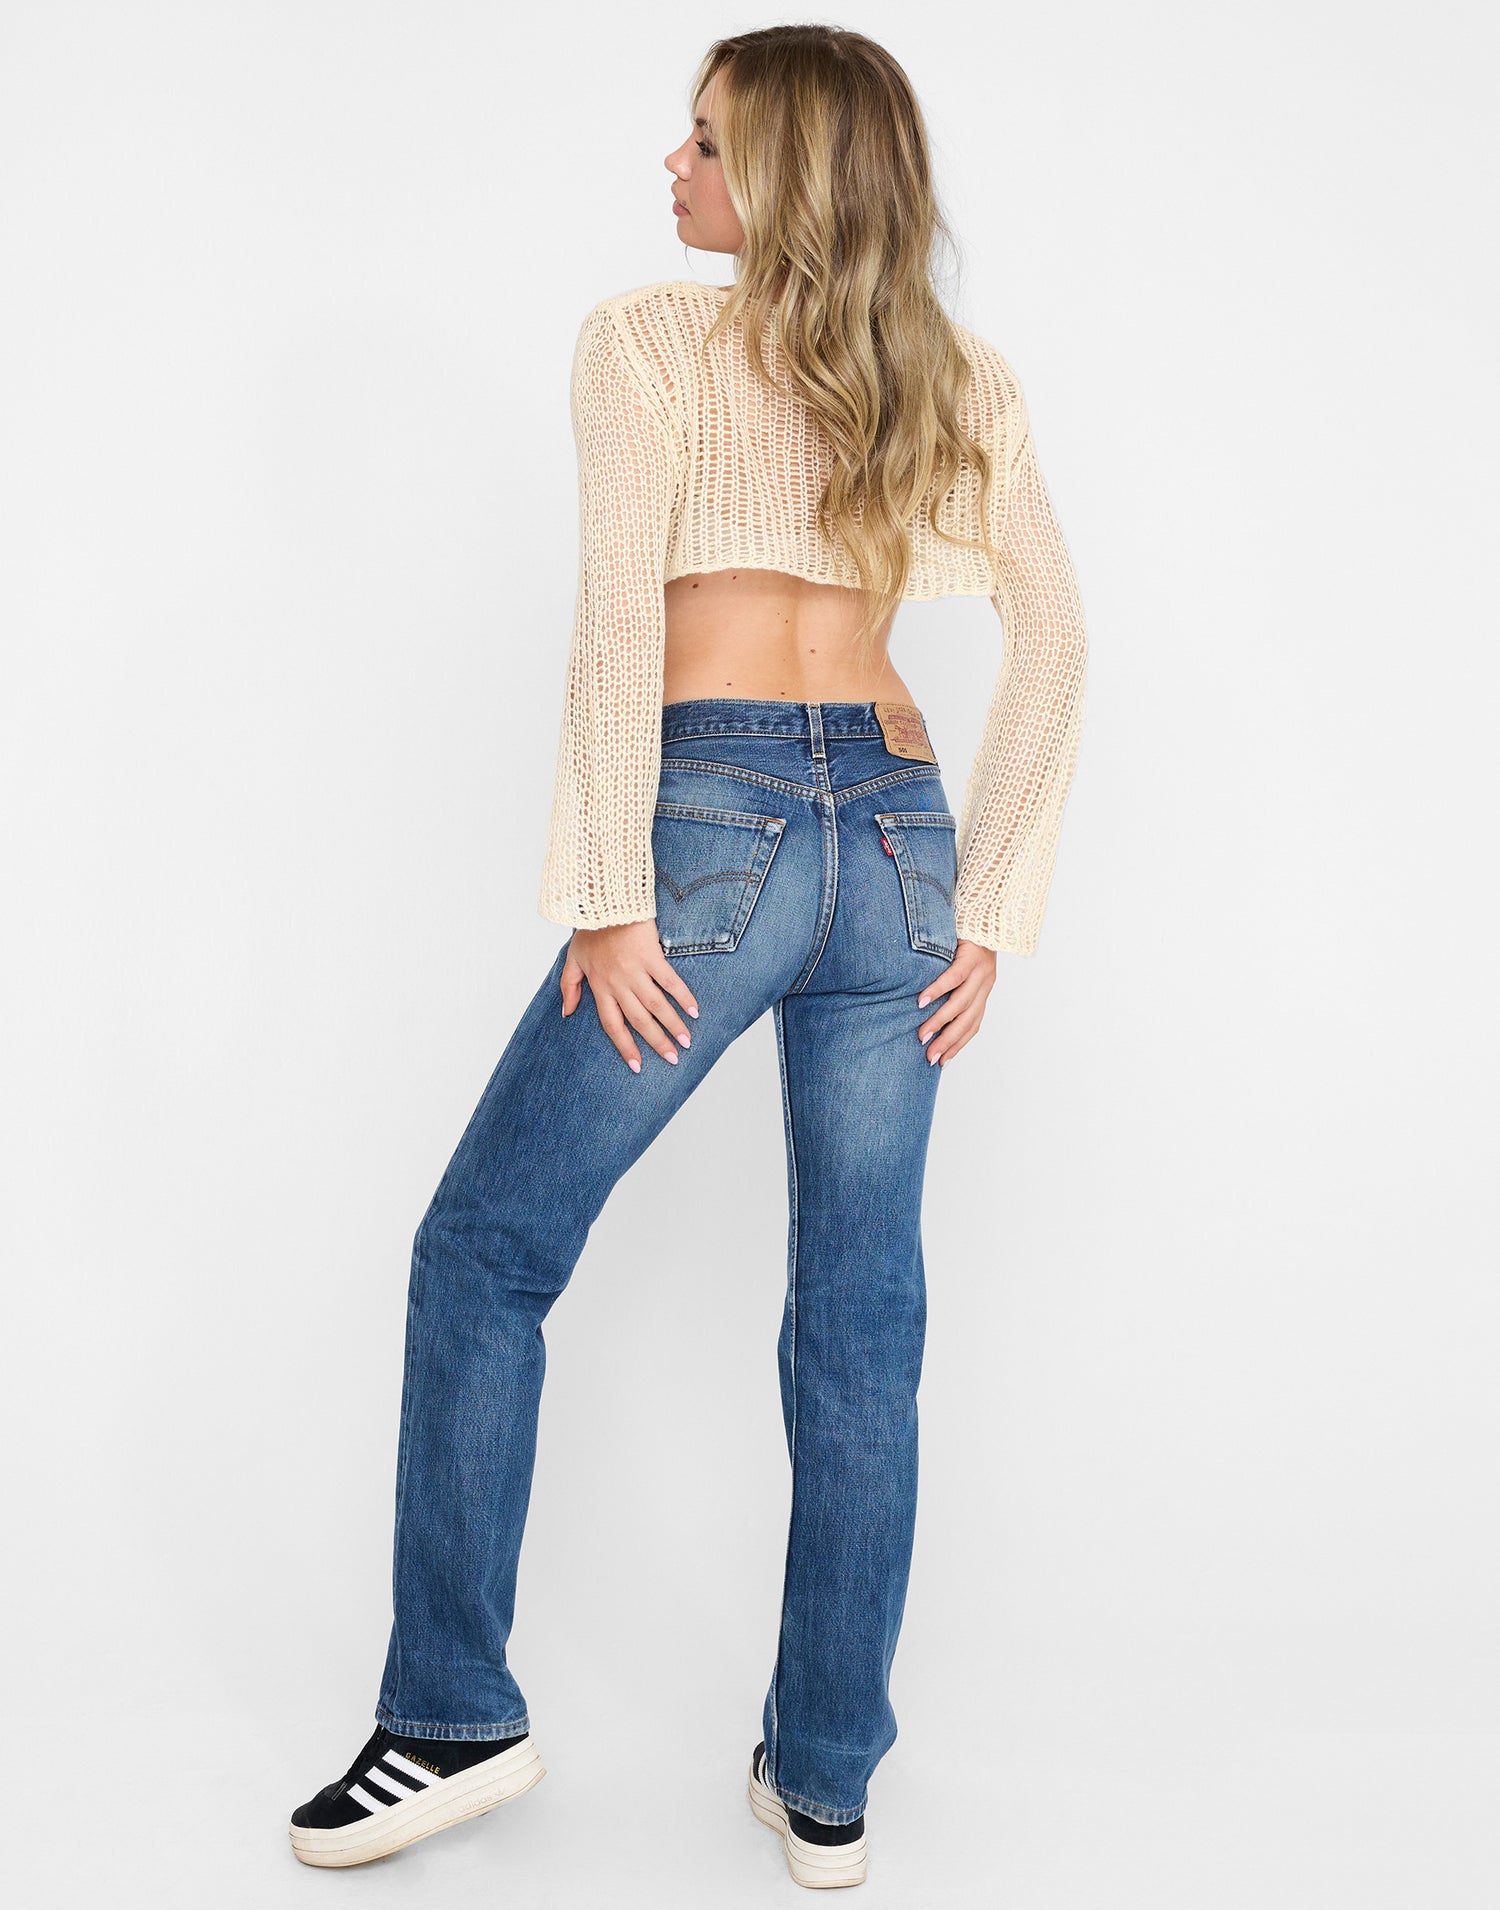 Kennedy Crochet Cropped Sweater by Summer Haus in Ivory - Back View